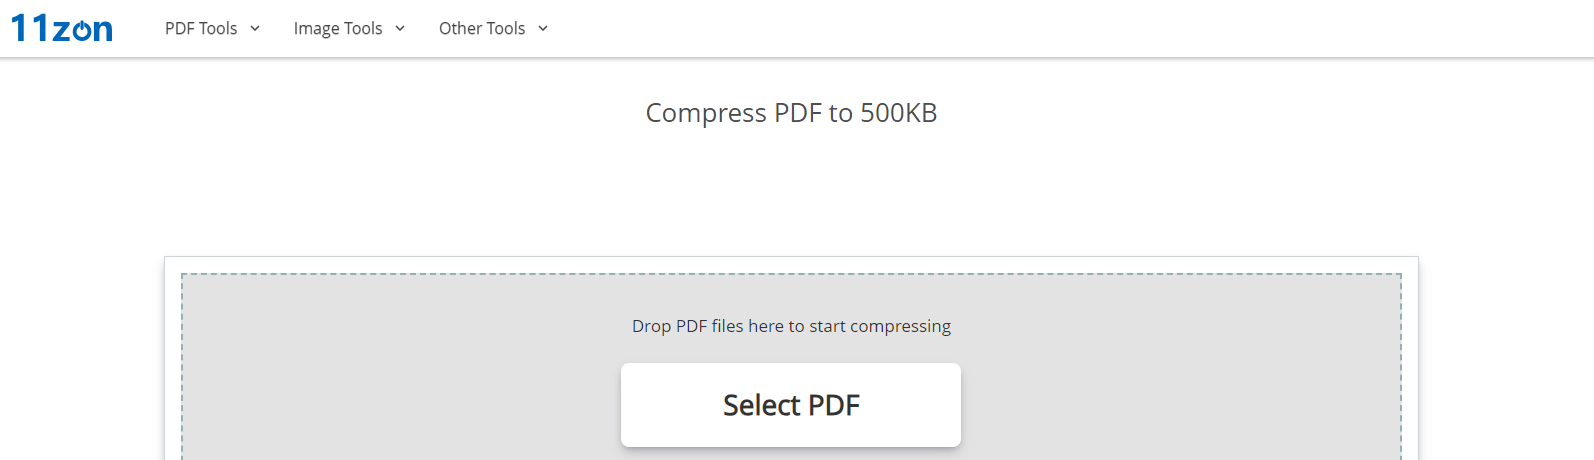 Compress PDF to 500KB with 11zon